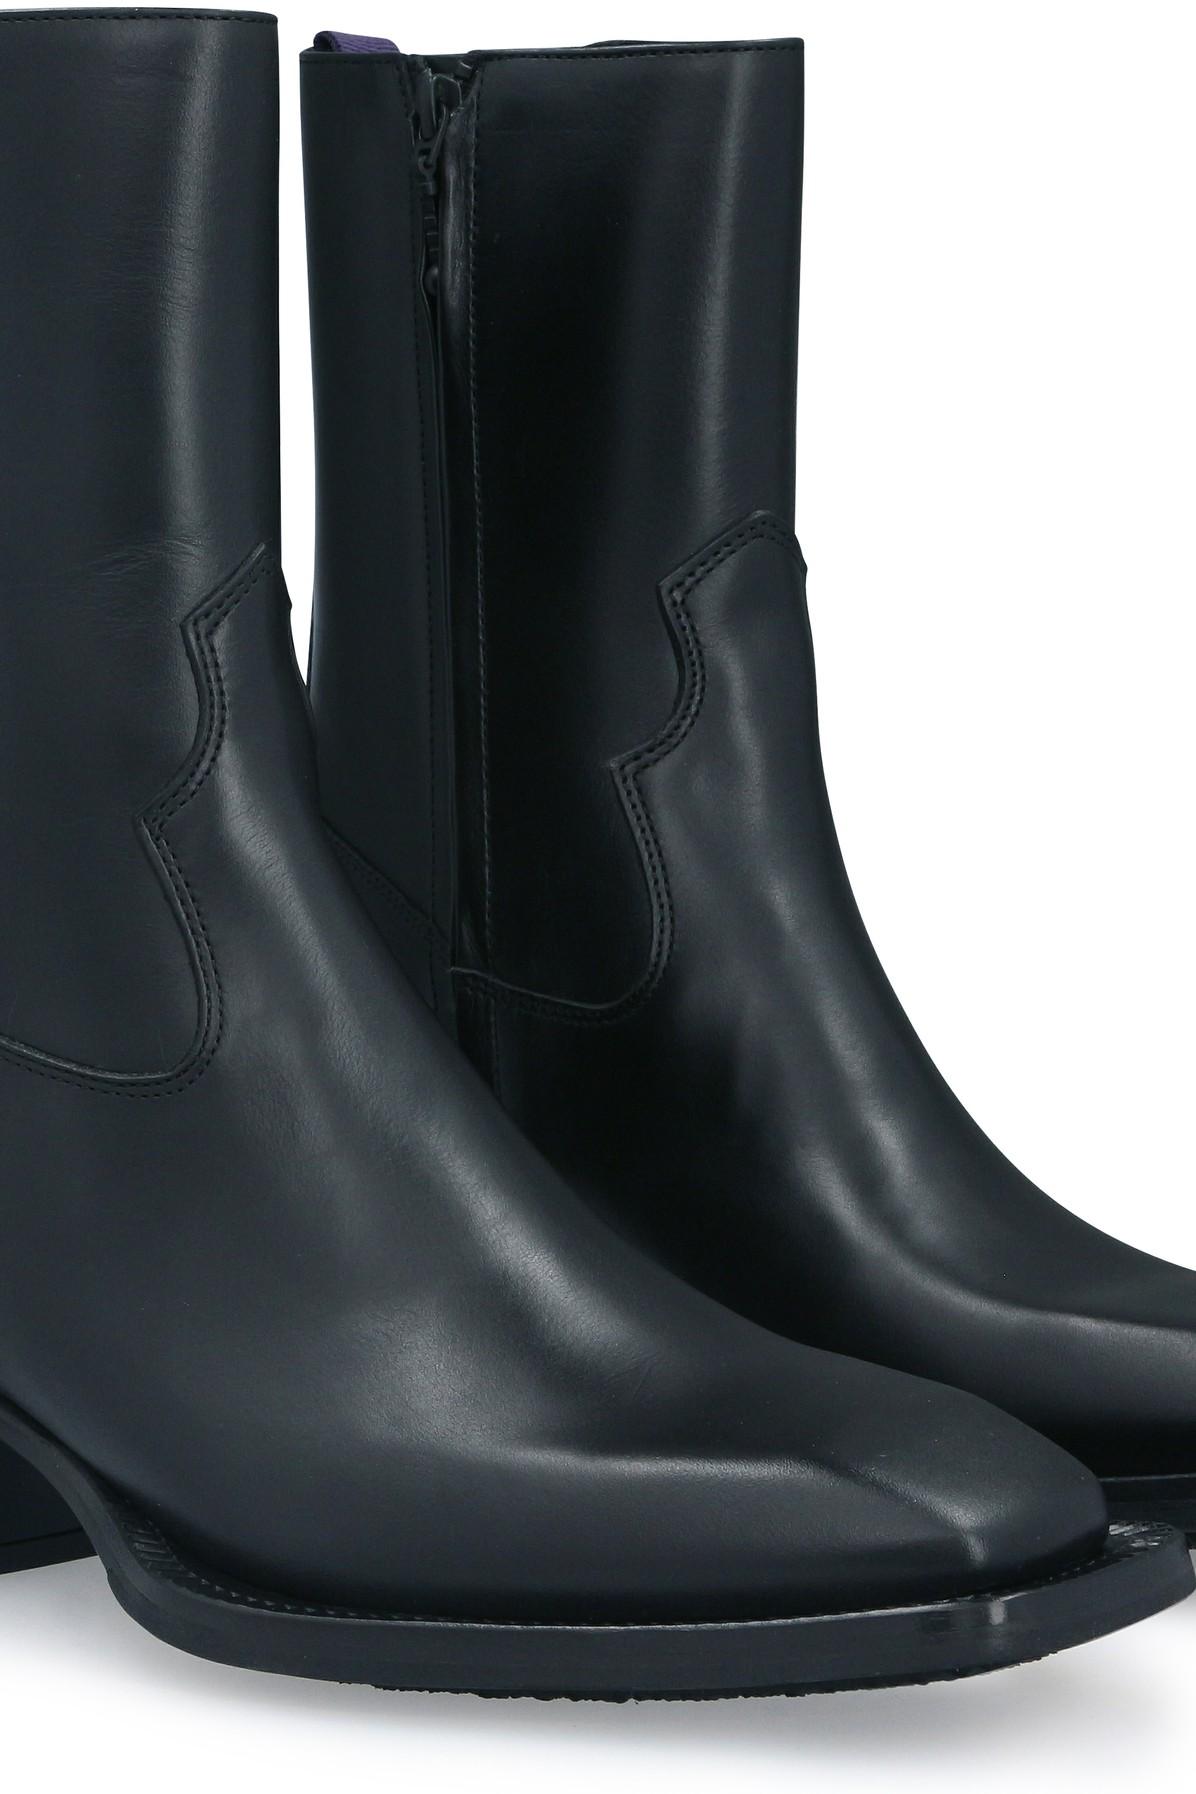 Eytys Luciano Boots in Black | Lyst